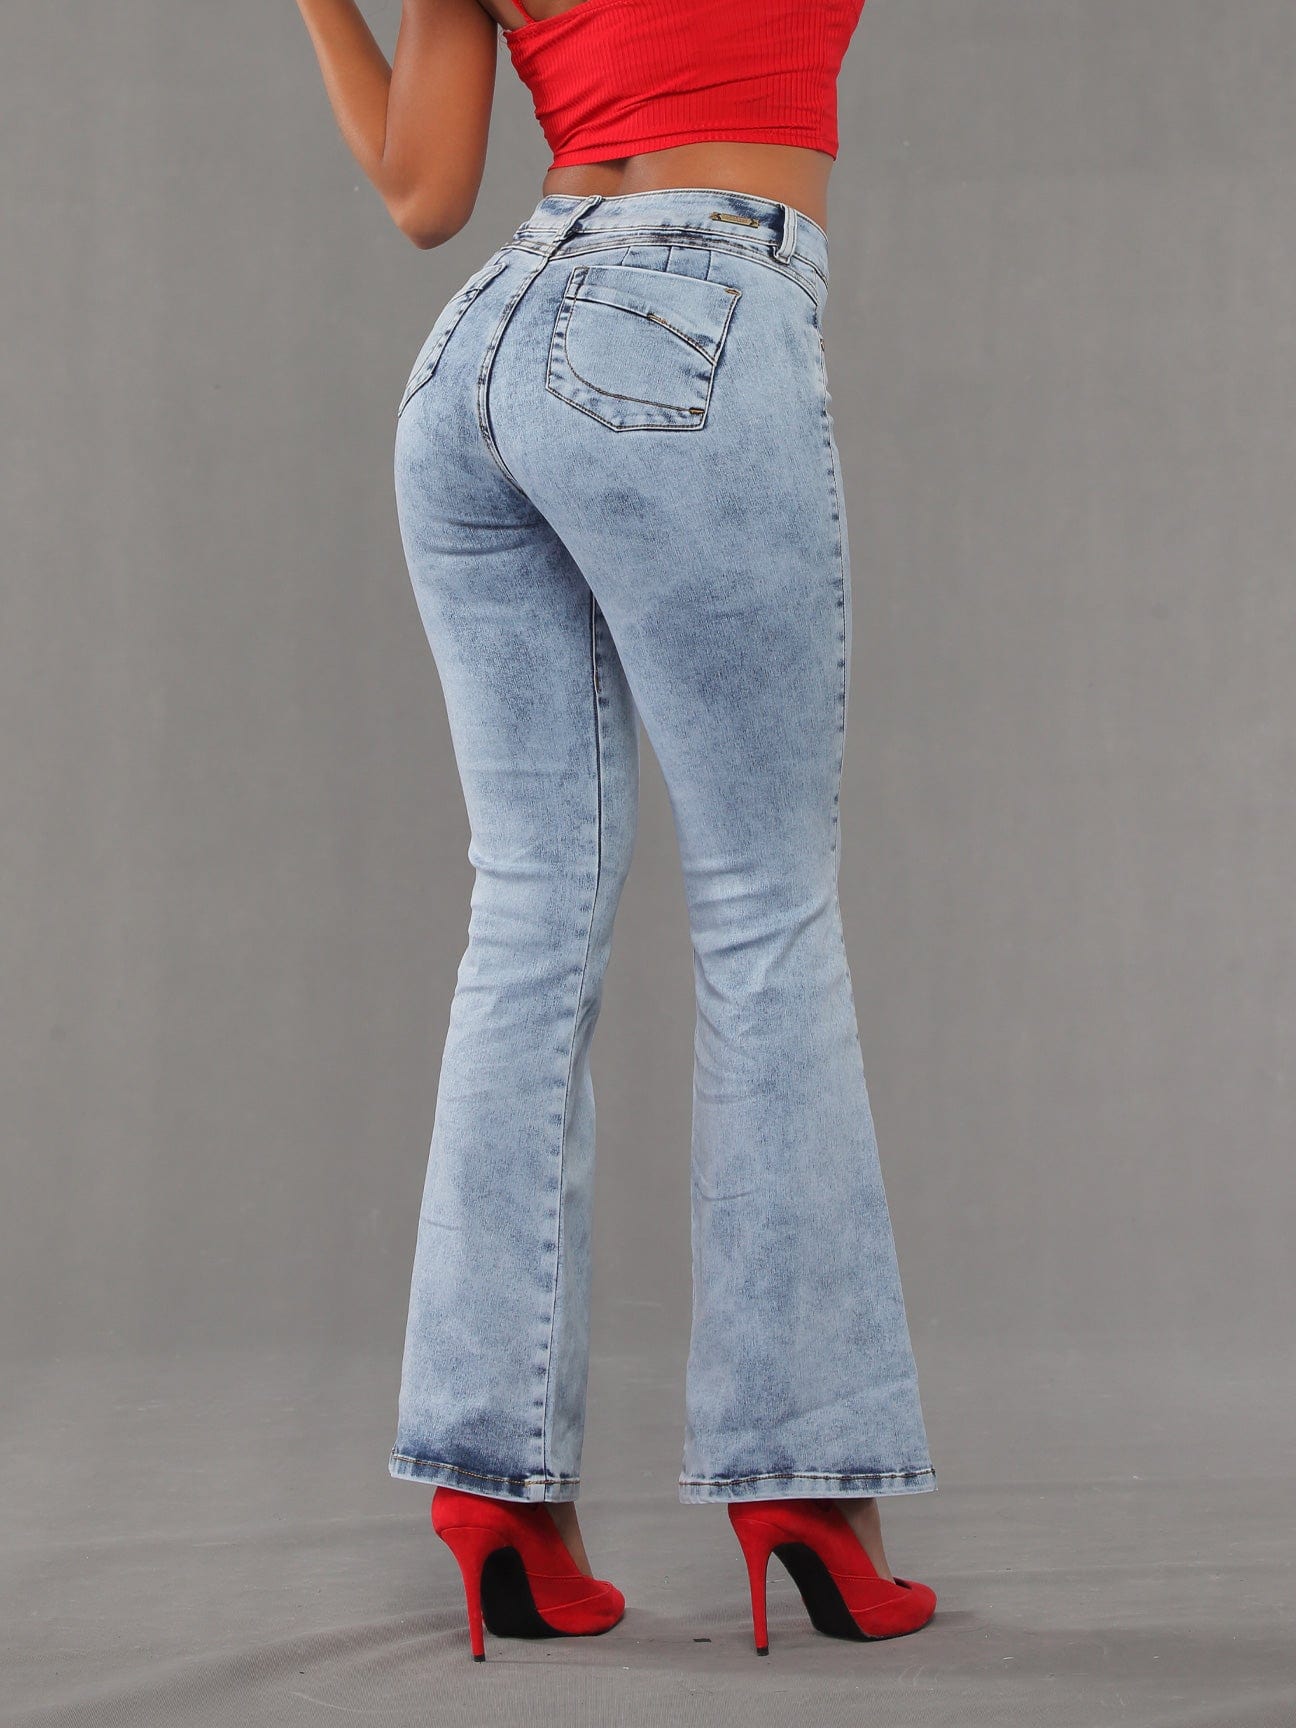 Butt Lift Jeans, Colombian Jeans Clearance